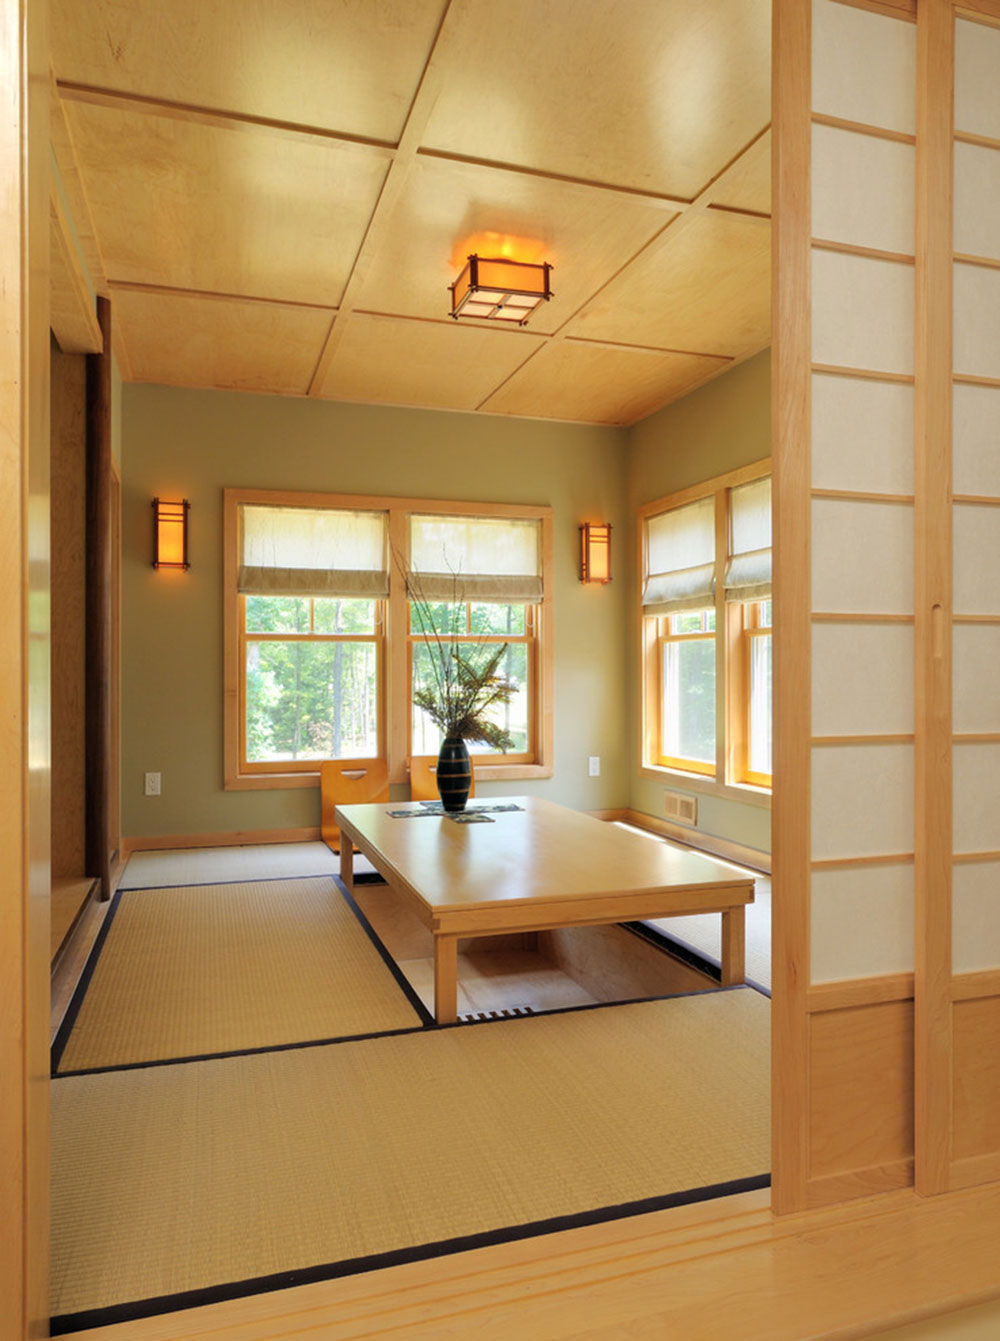 Ridge-View-Residence-by-Kuhn-Riddle-Architects What a traditional Japanese home interior looks like